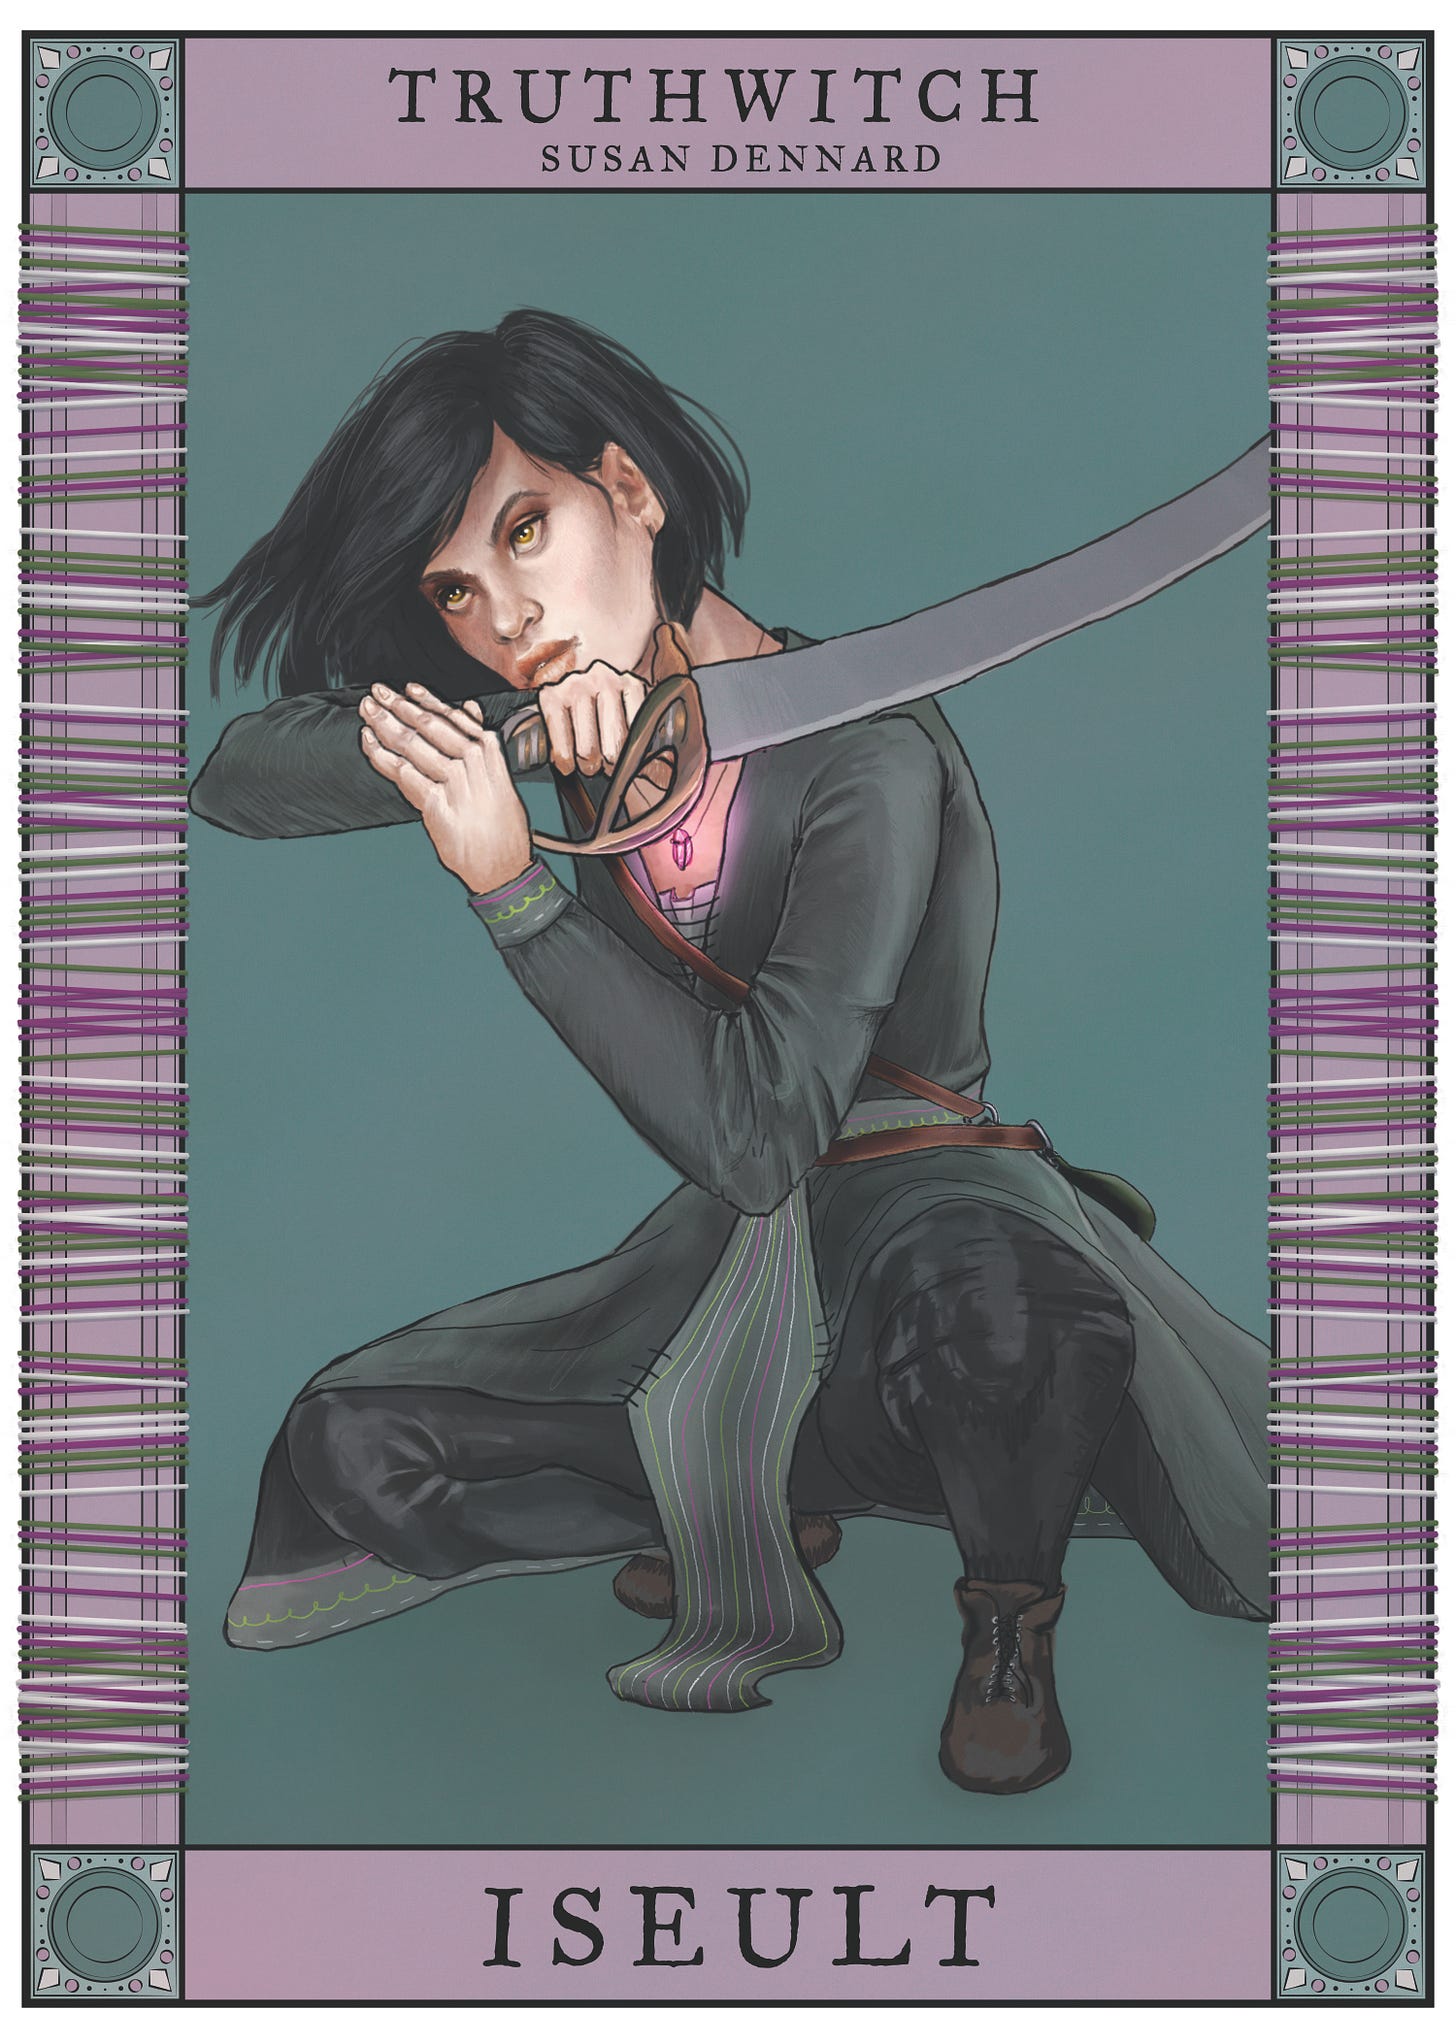 An illustration of Iseult crouched and holding a sword, her stance defensive and her expression fierce